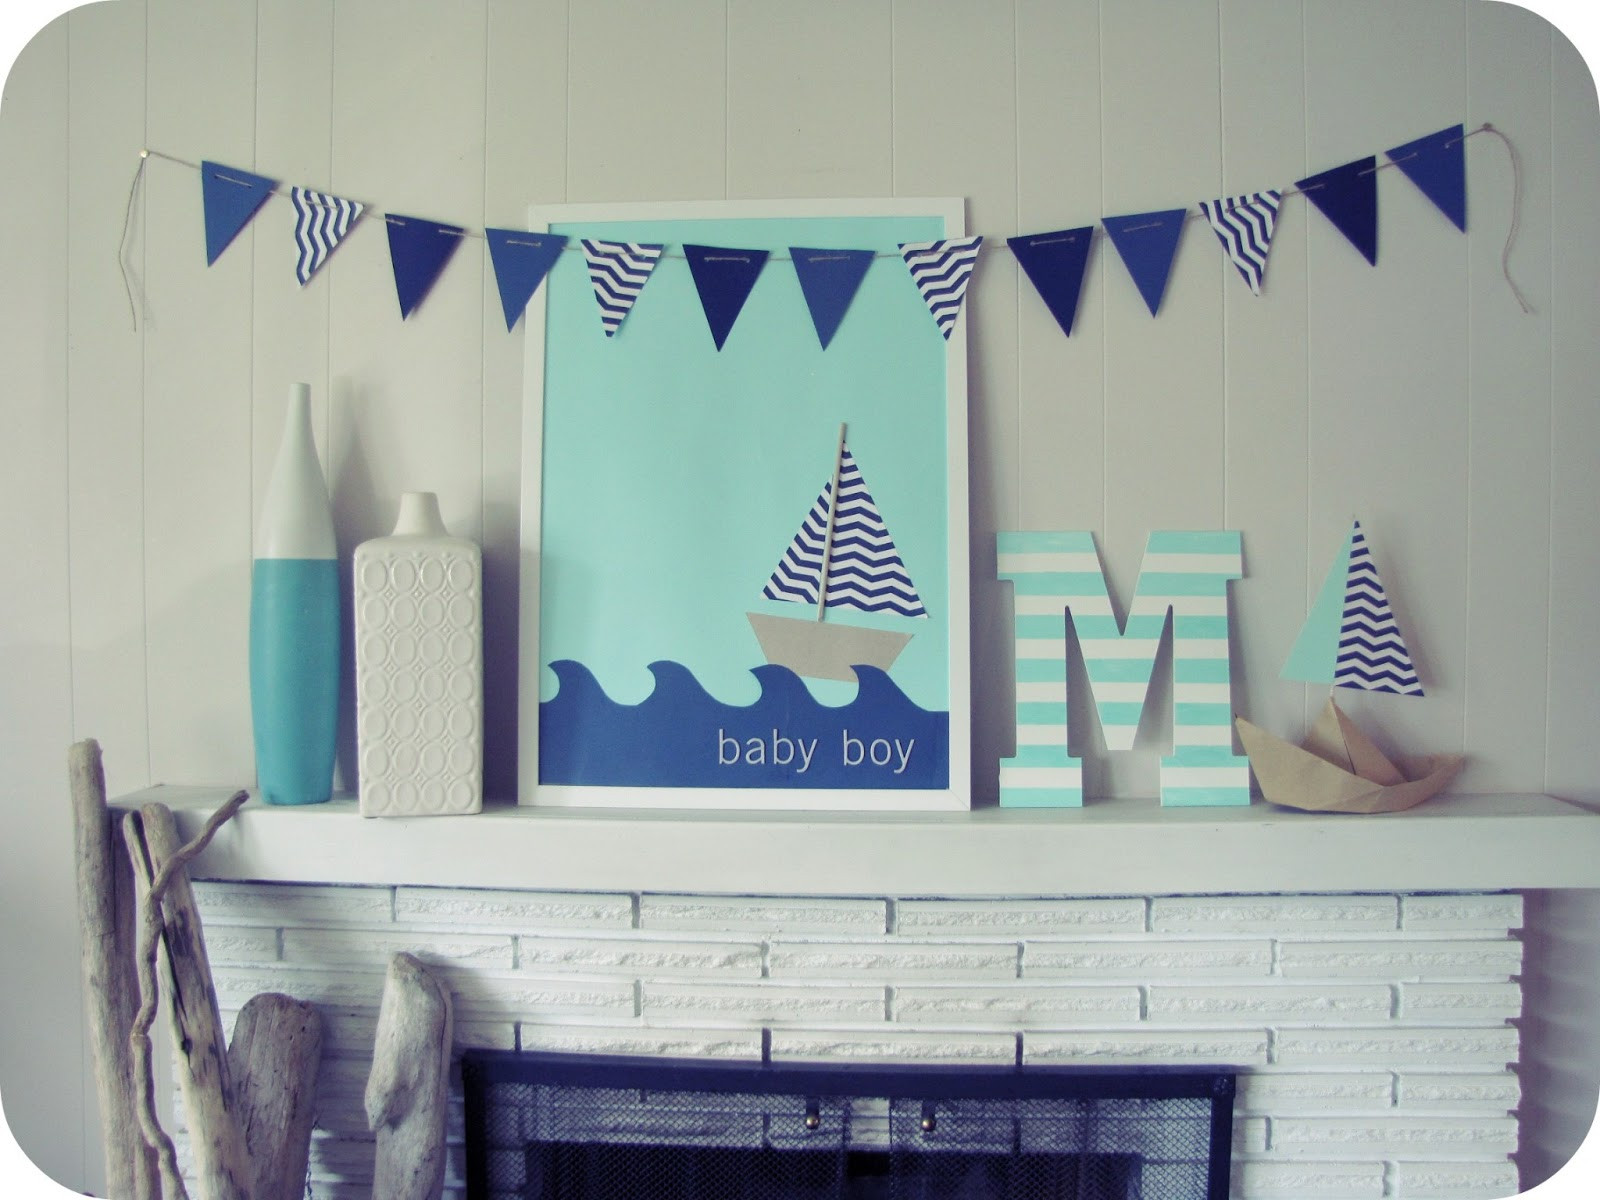 Nautical Baby Boy Decor
 My House of Giggles A Nautical Baby Boy Shower for Malcolm